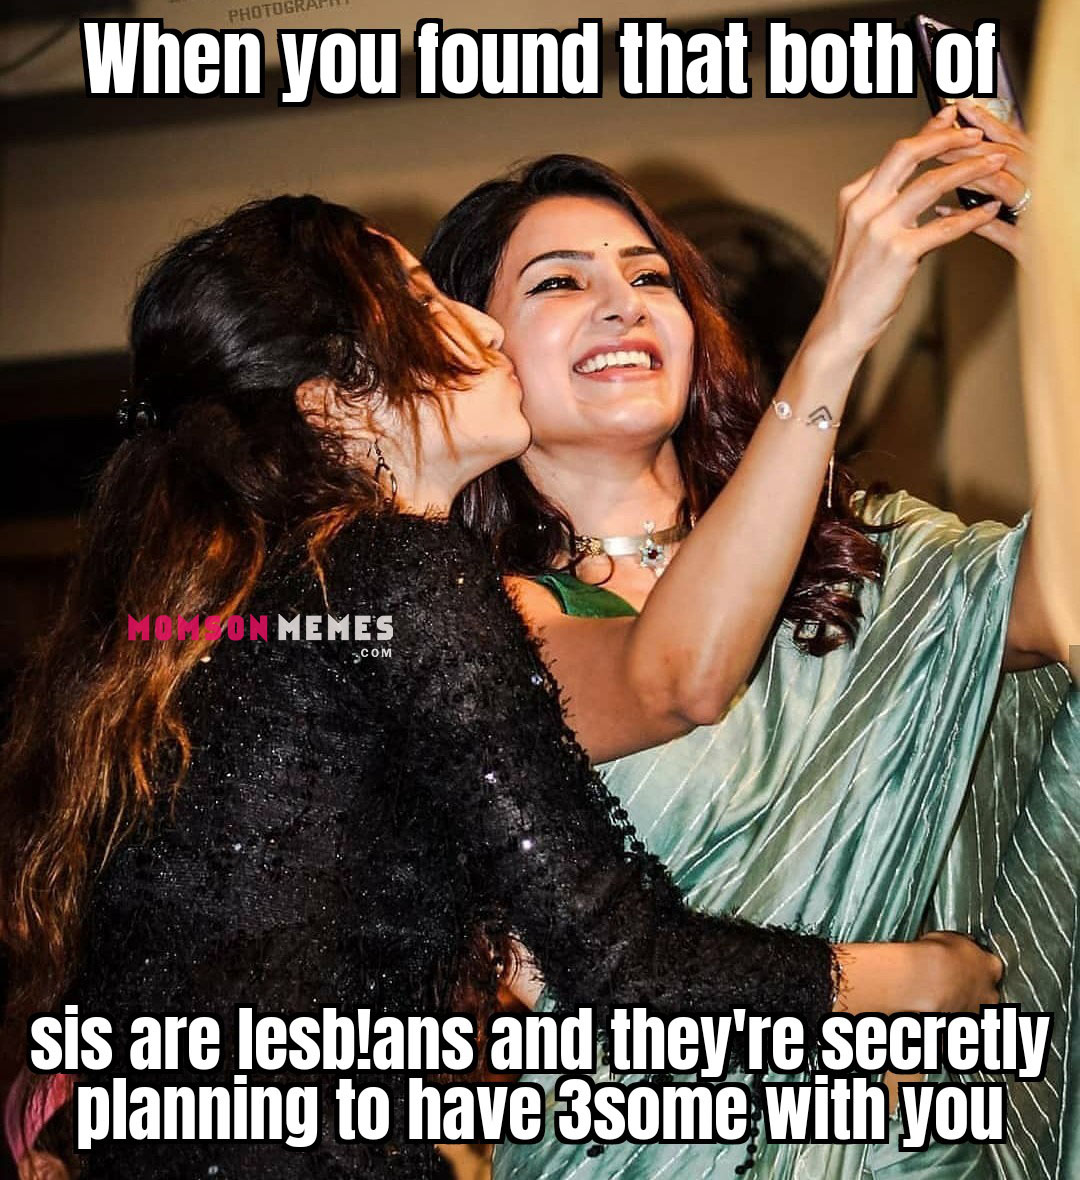 Lesbian Threesome Memes - Threesome with sisters - Incest Mom Son Captions Memes